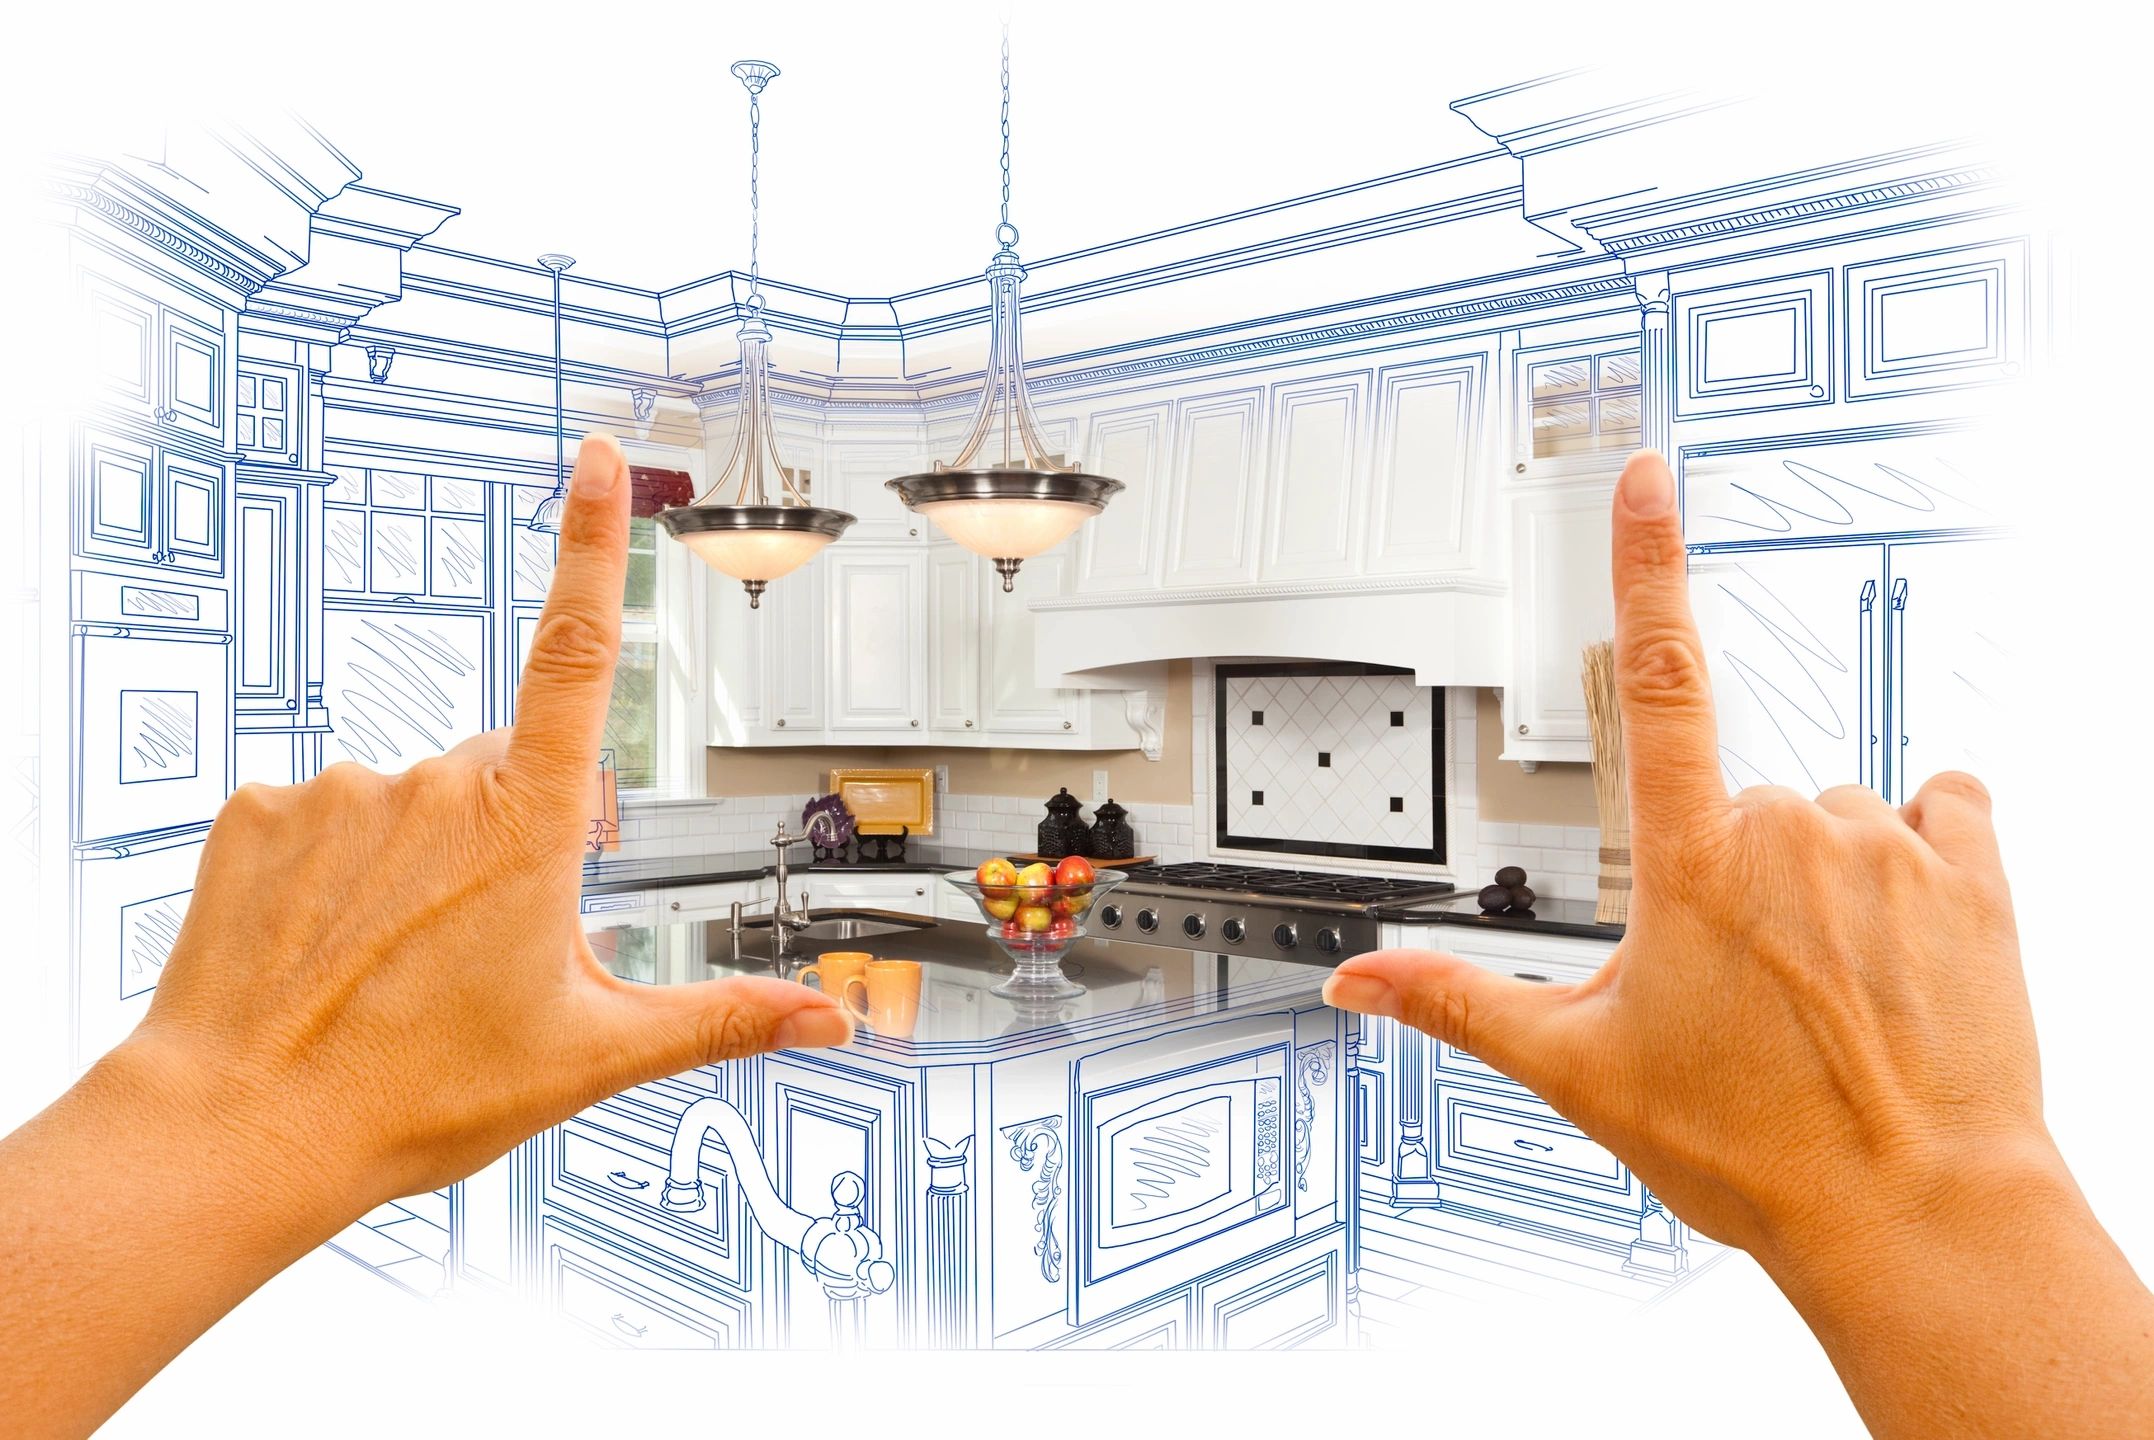 two hands frame the heart of a kitchen bringing it to life. The rest is drawing and awaits the imagination of its owner to be realized so that kitchen renovations on a budget can make their dream kitchen a reality.